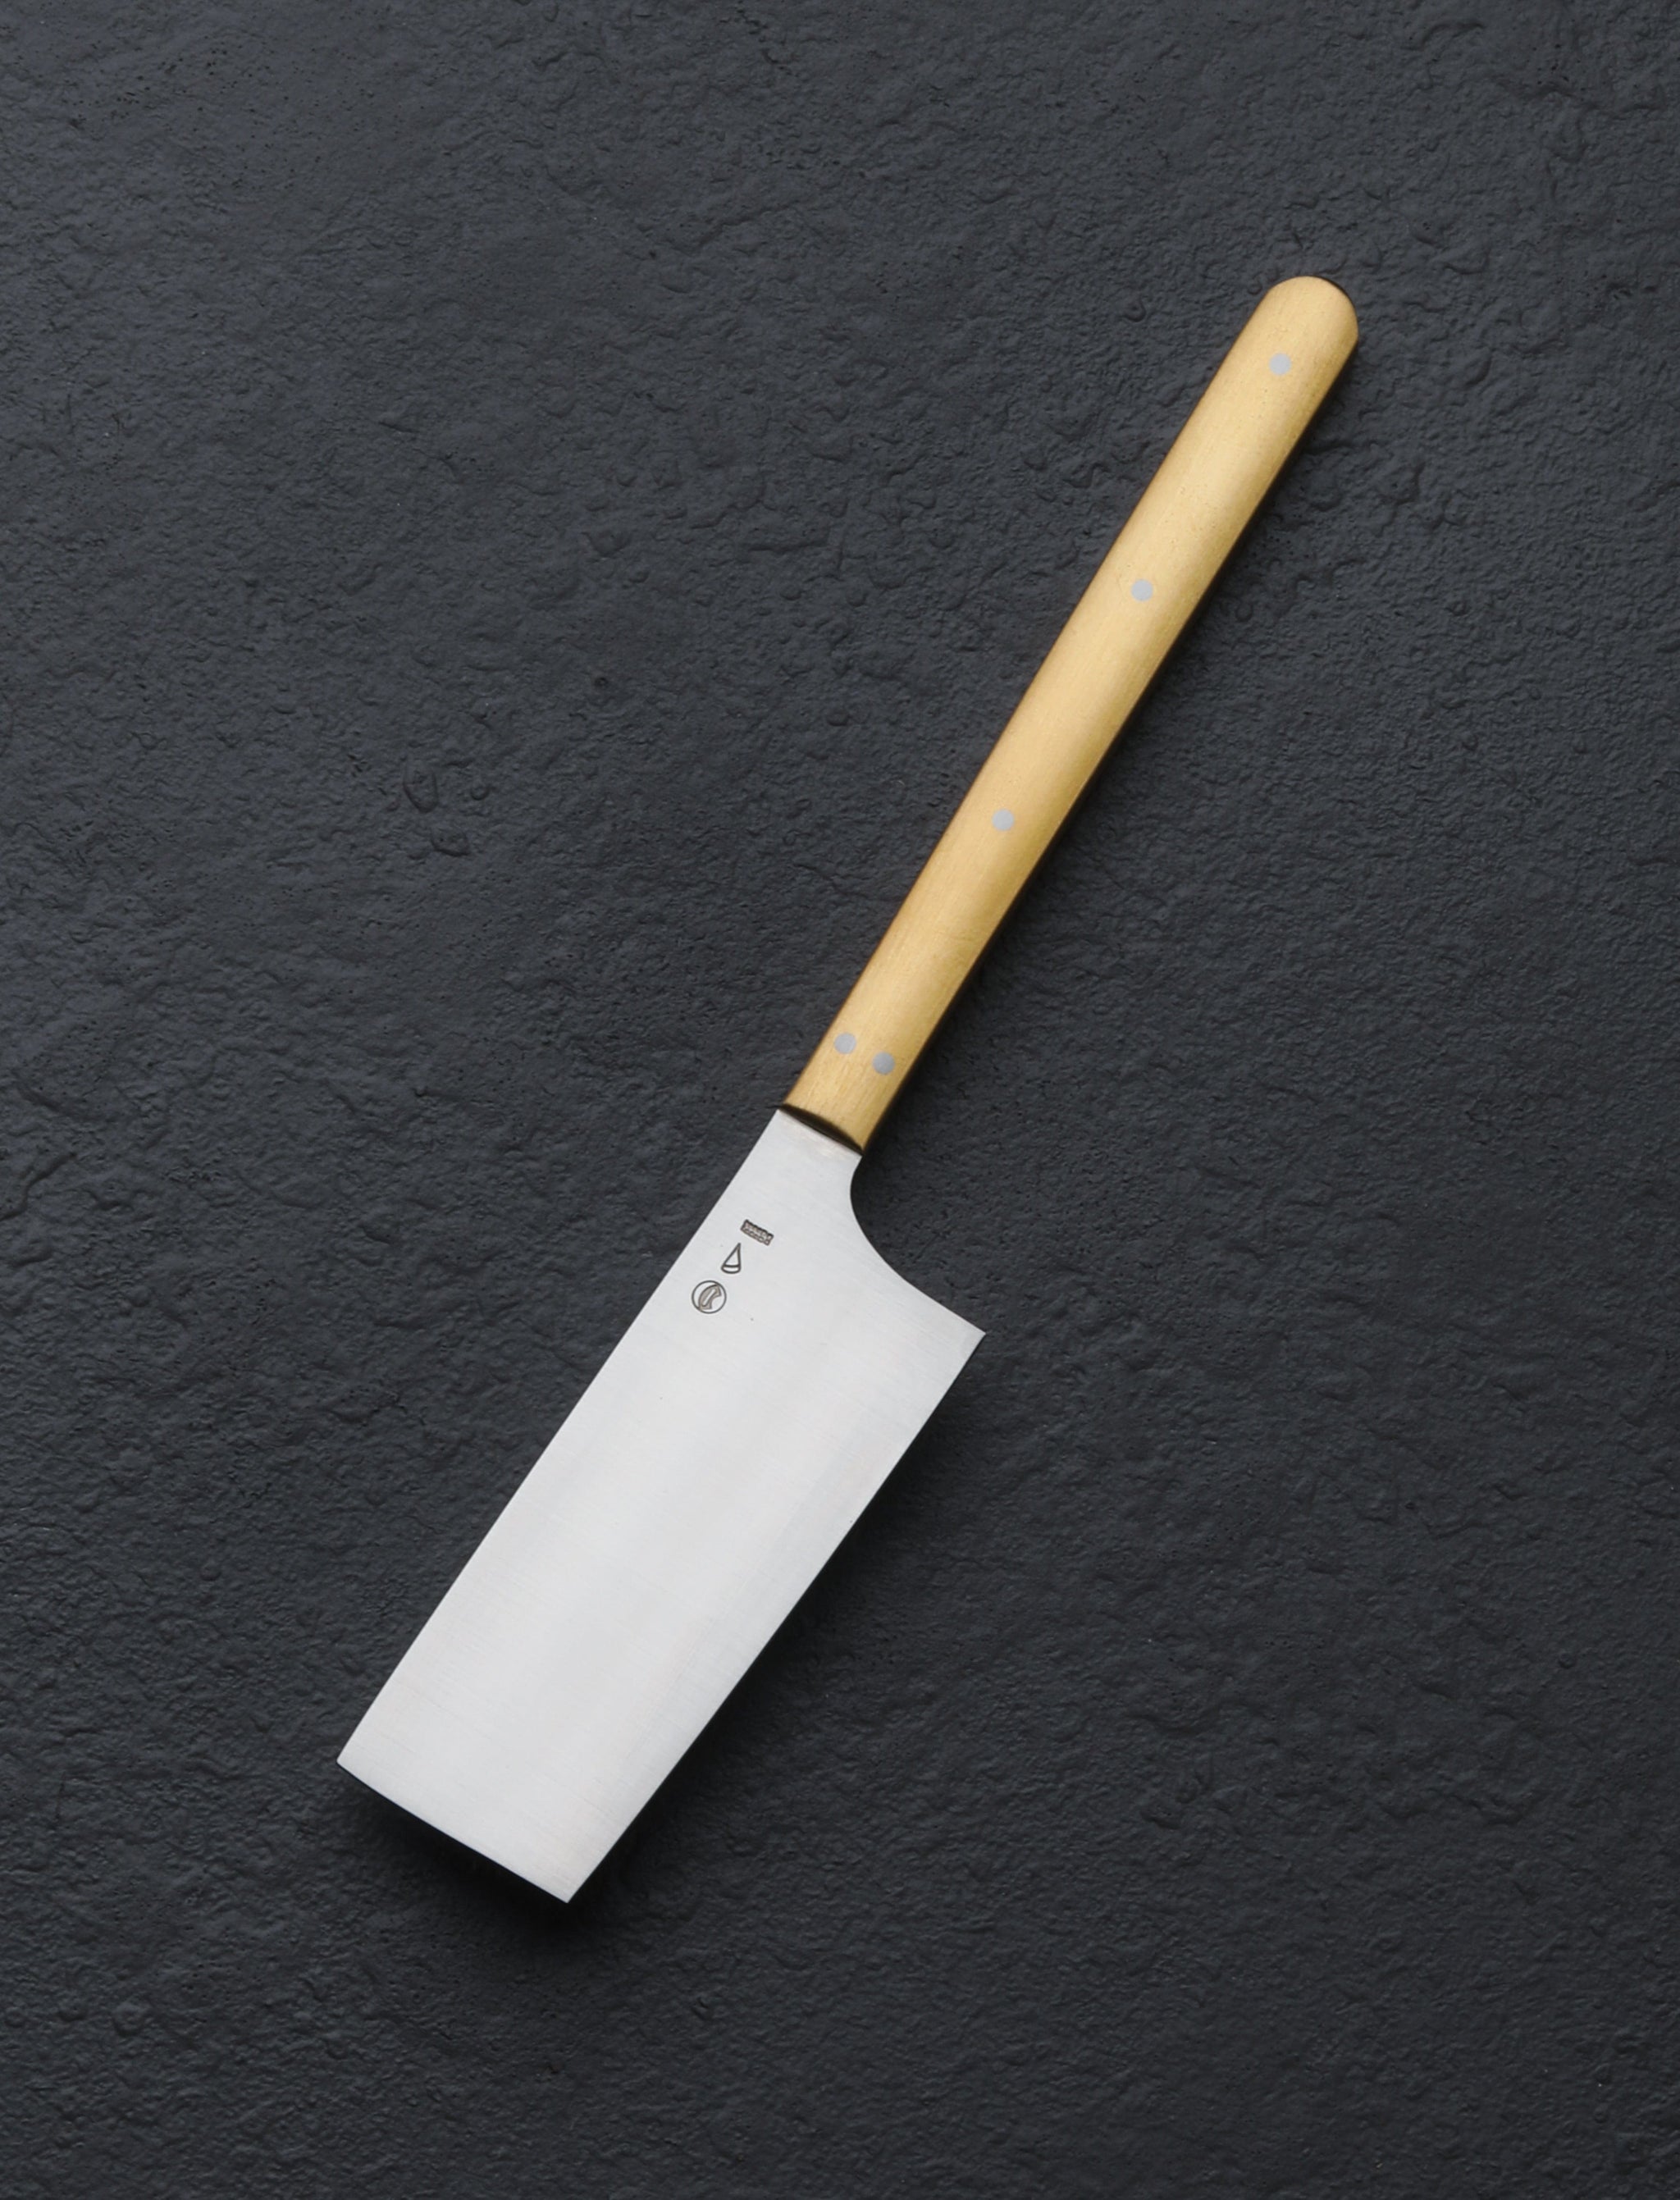 Matte Copper Cheese Knife, Be Home